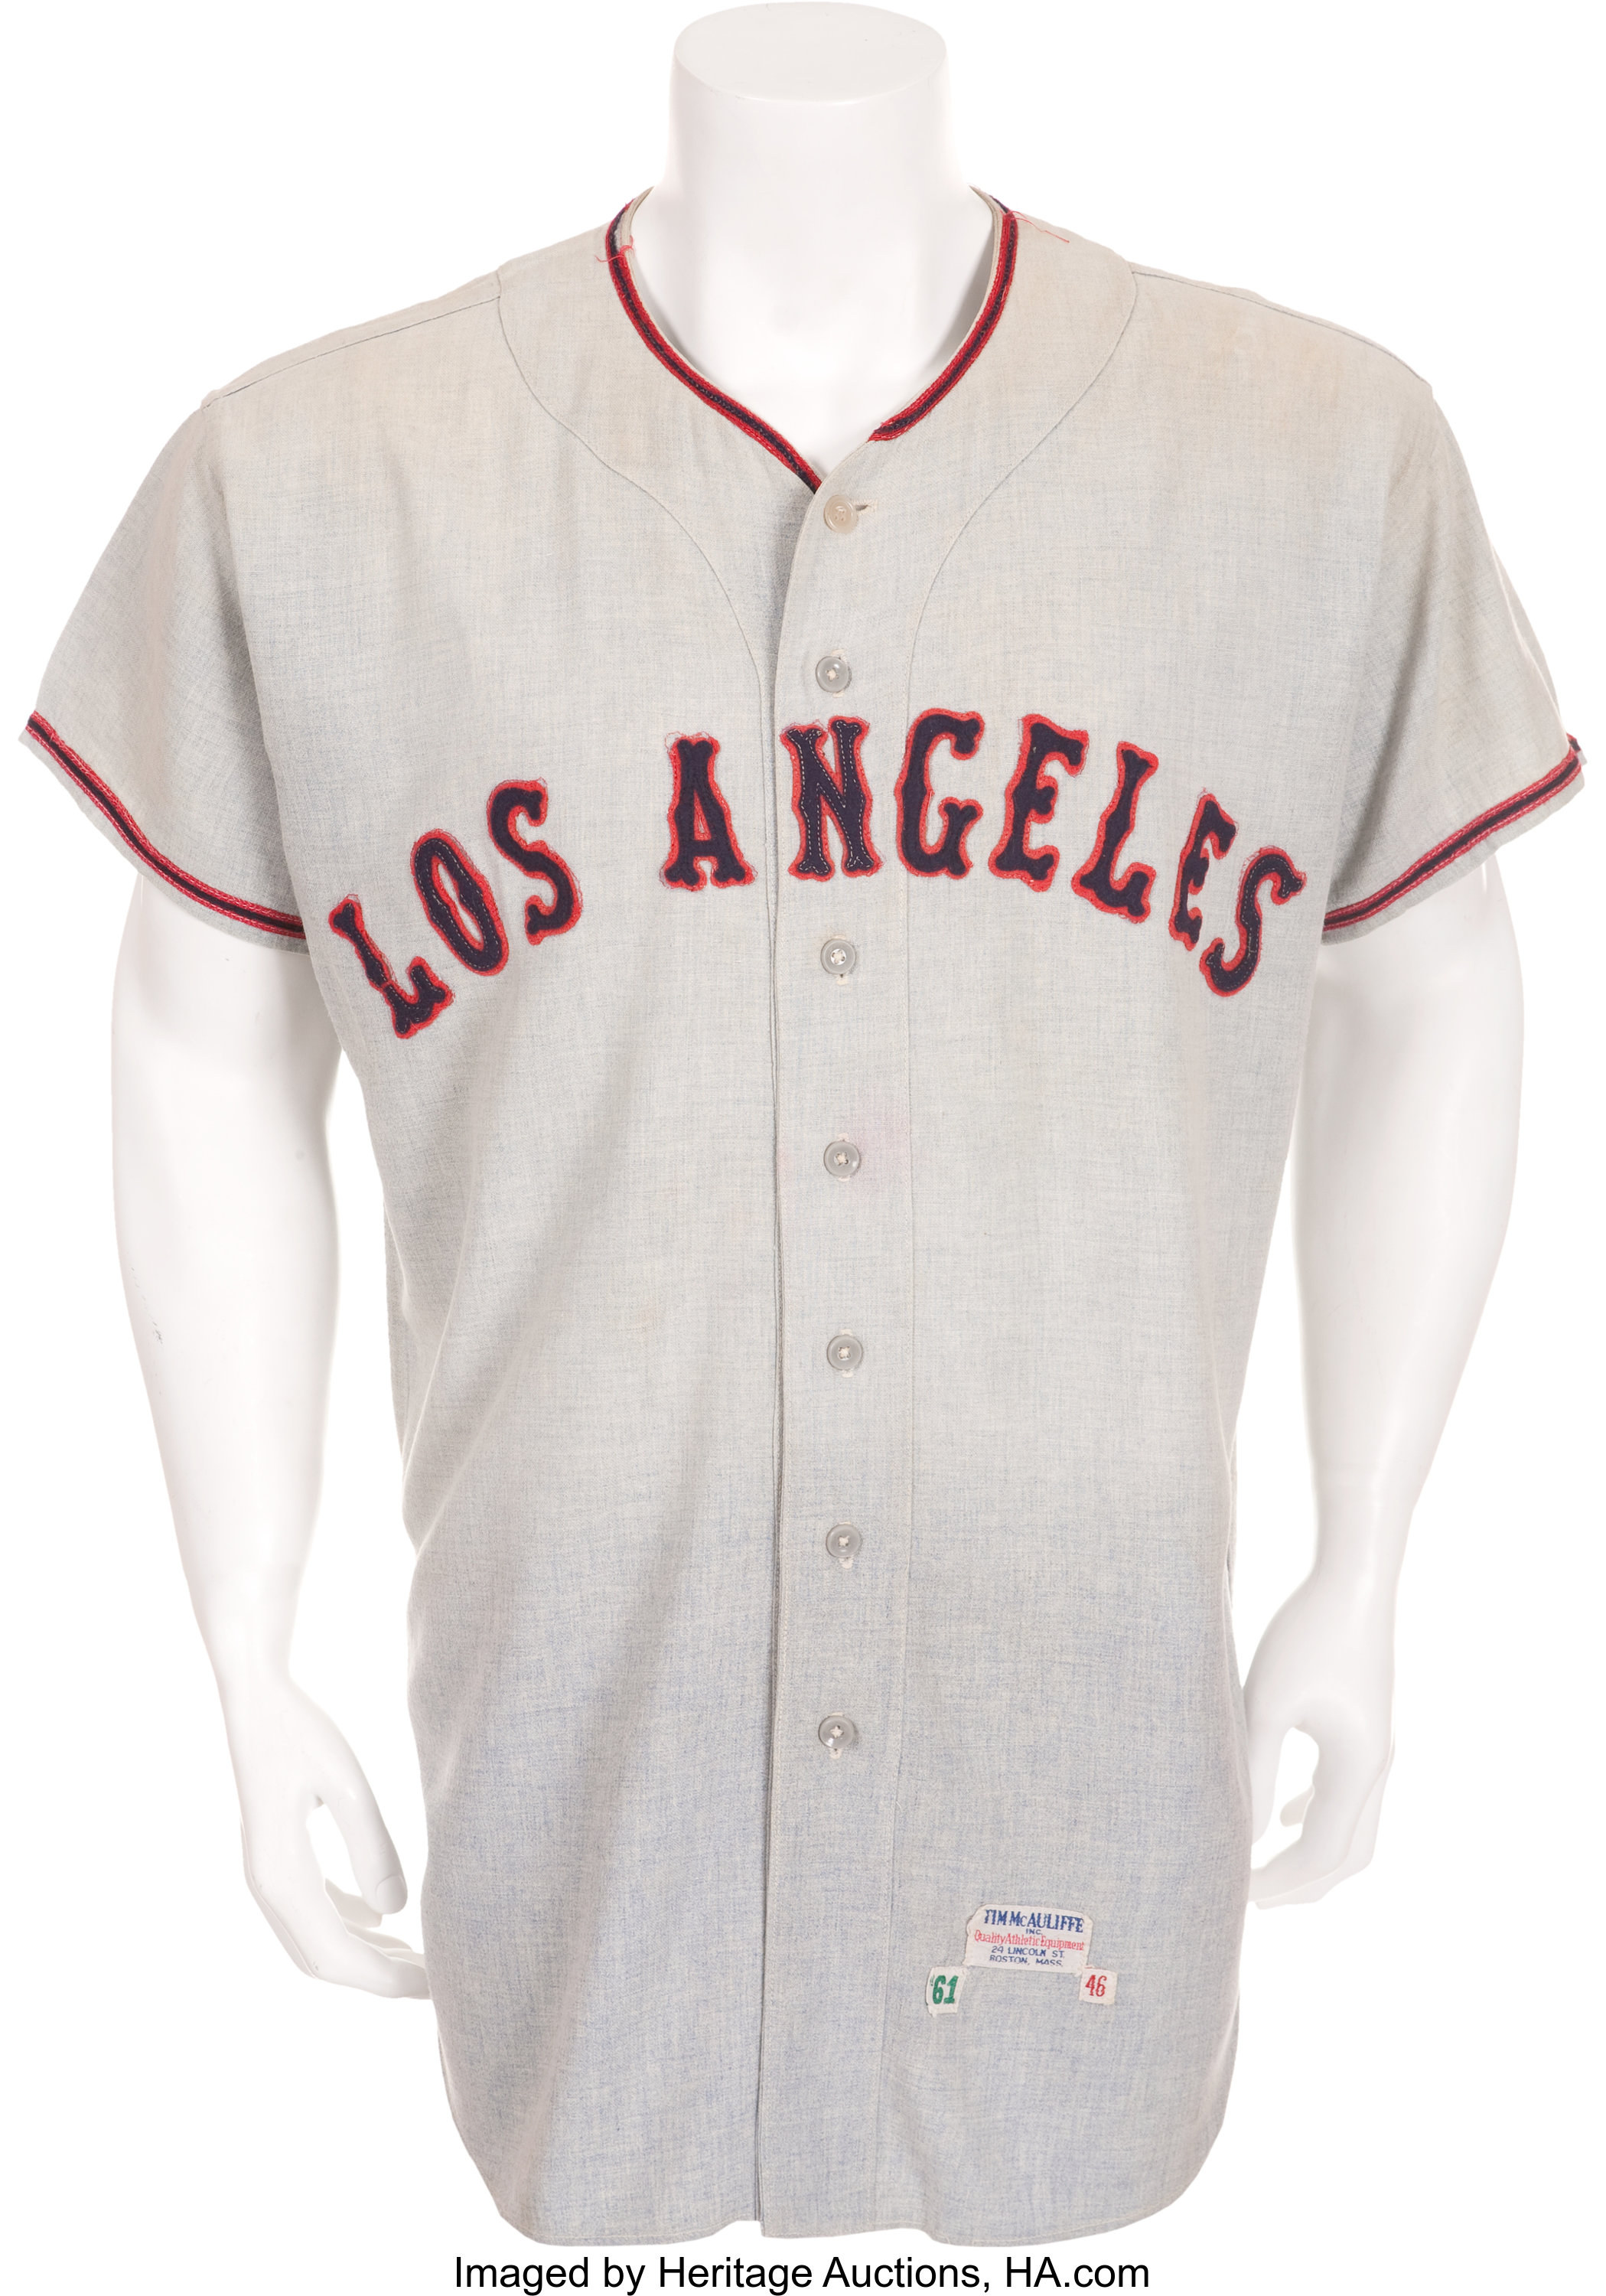 Los Angeles Angels 1961 uniform artwork, This is a highly d…